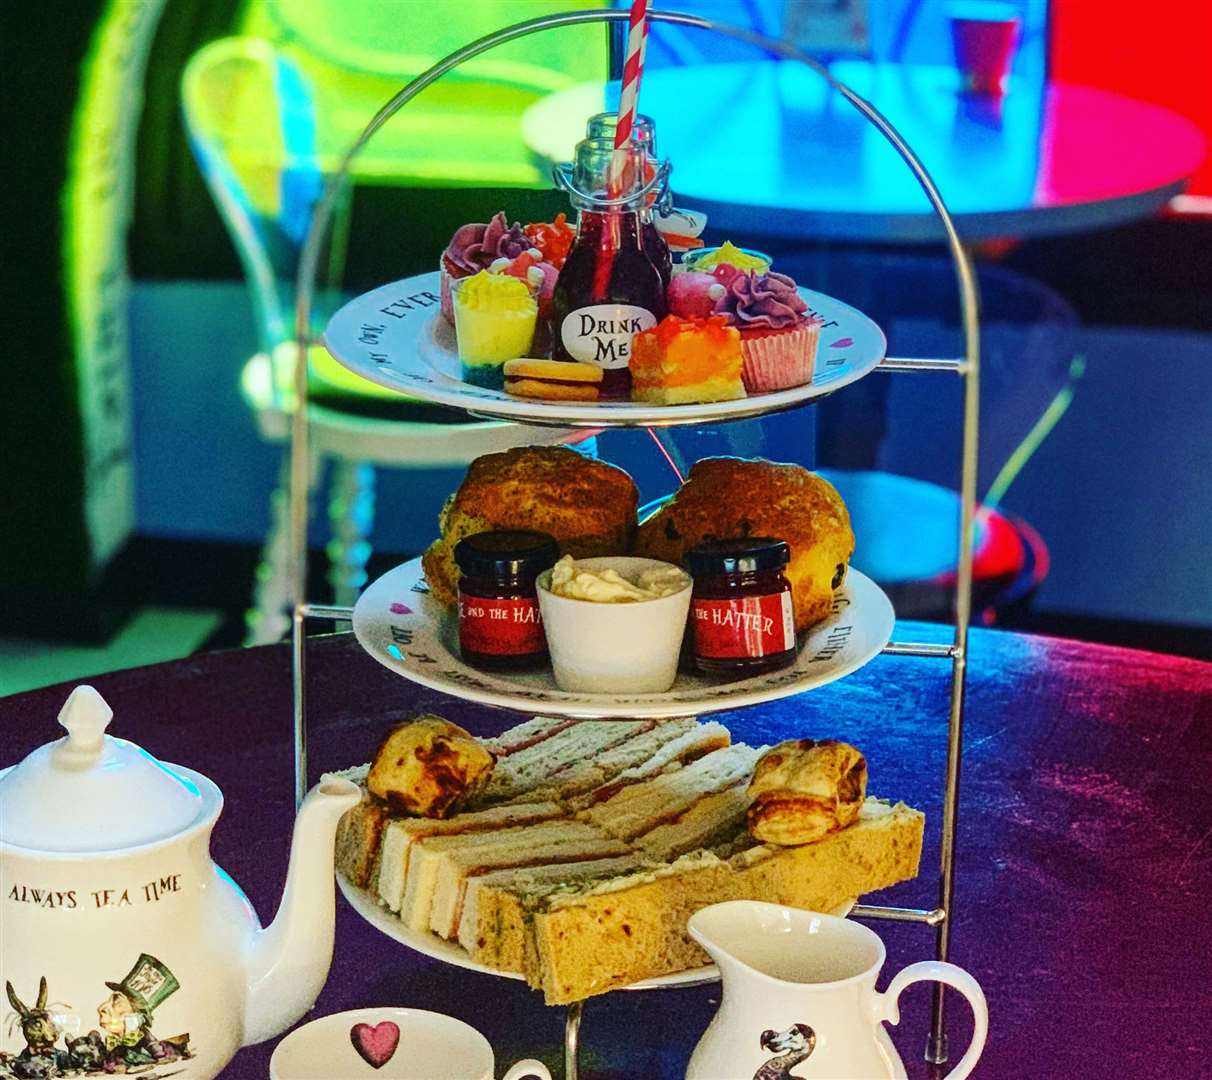 Afternoon tea is a treat at Alice and the Hatter